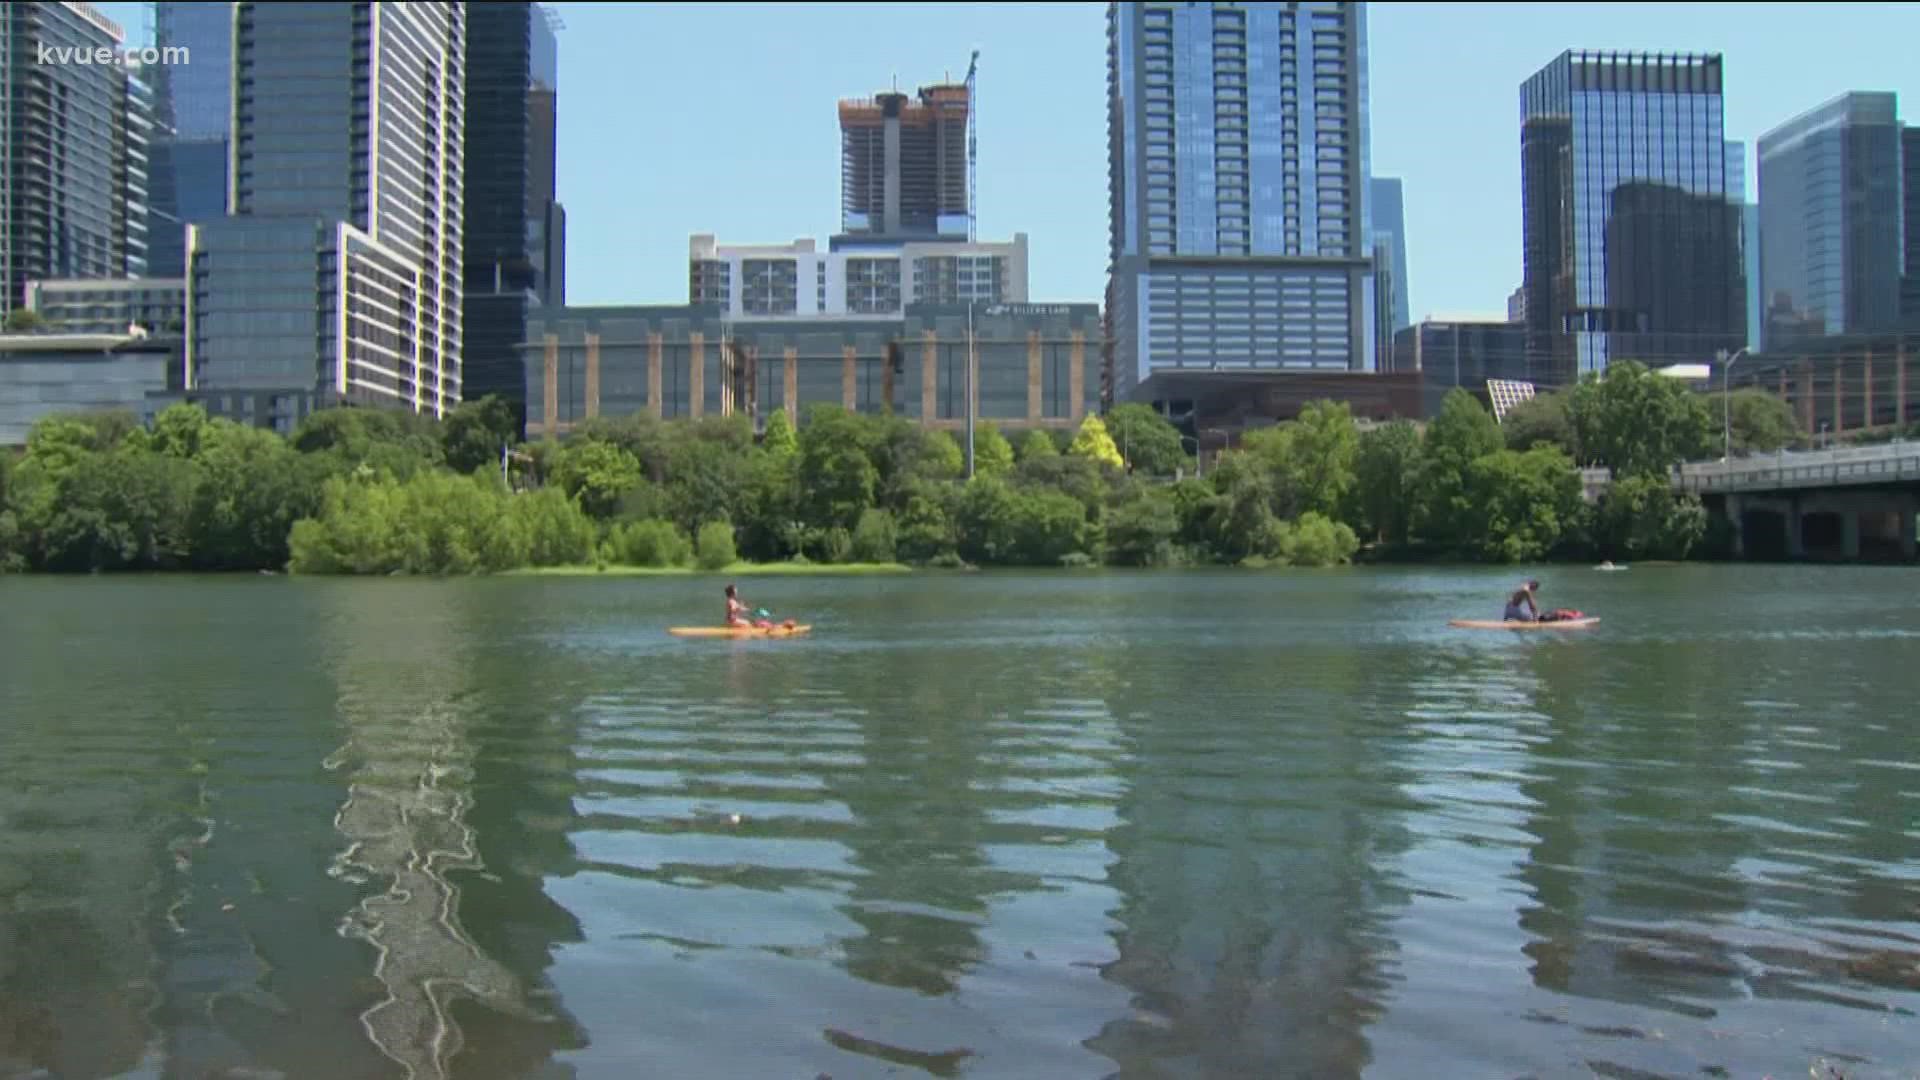 It's been a hot weekend, and this coming week will be even hotter. We spoke to some Austin residents about things they're doing to help beat the heat.